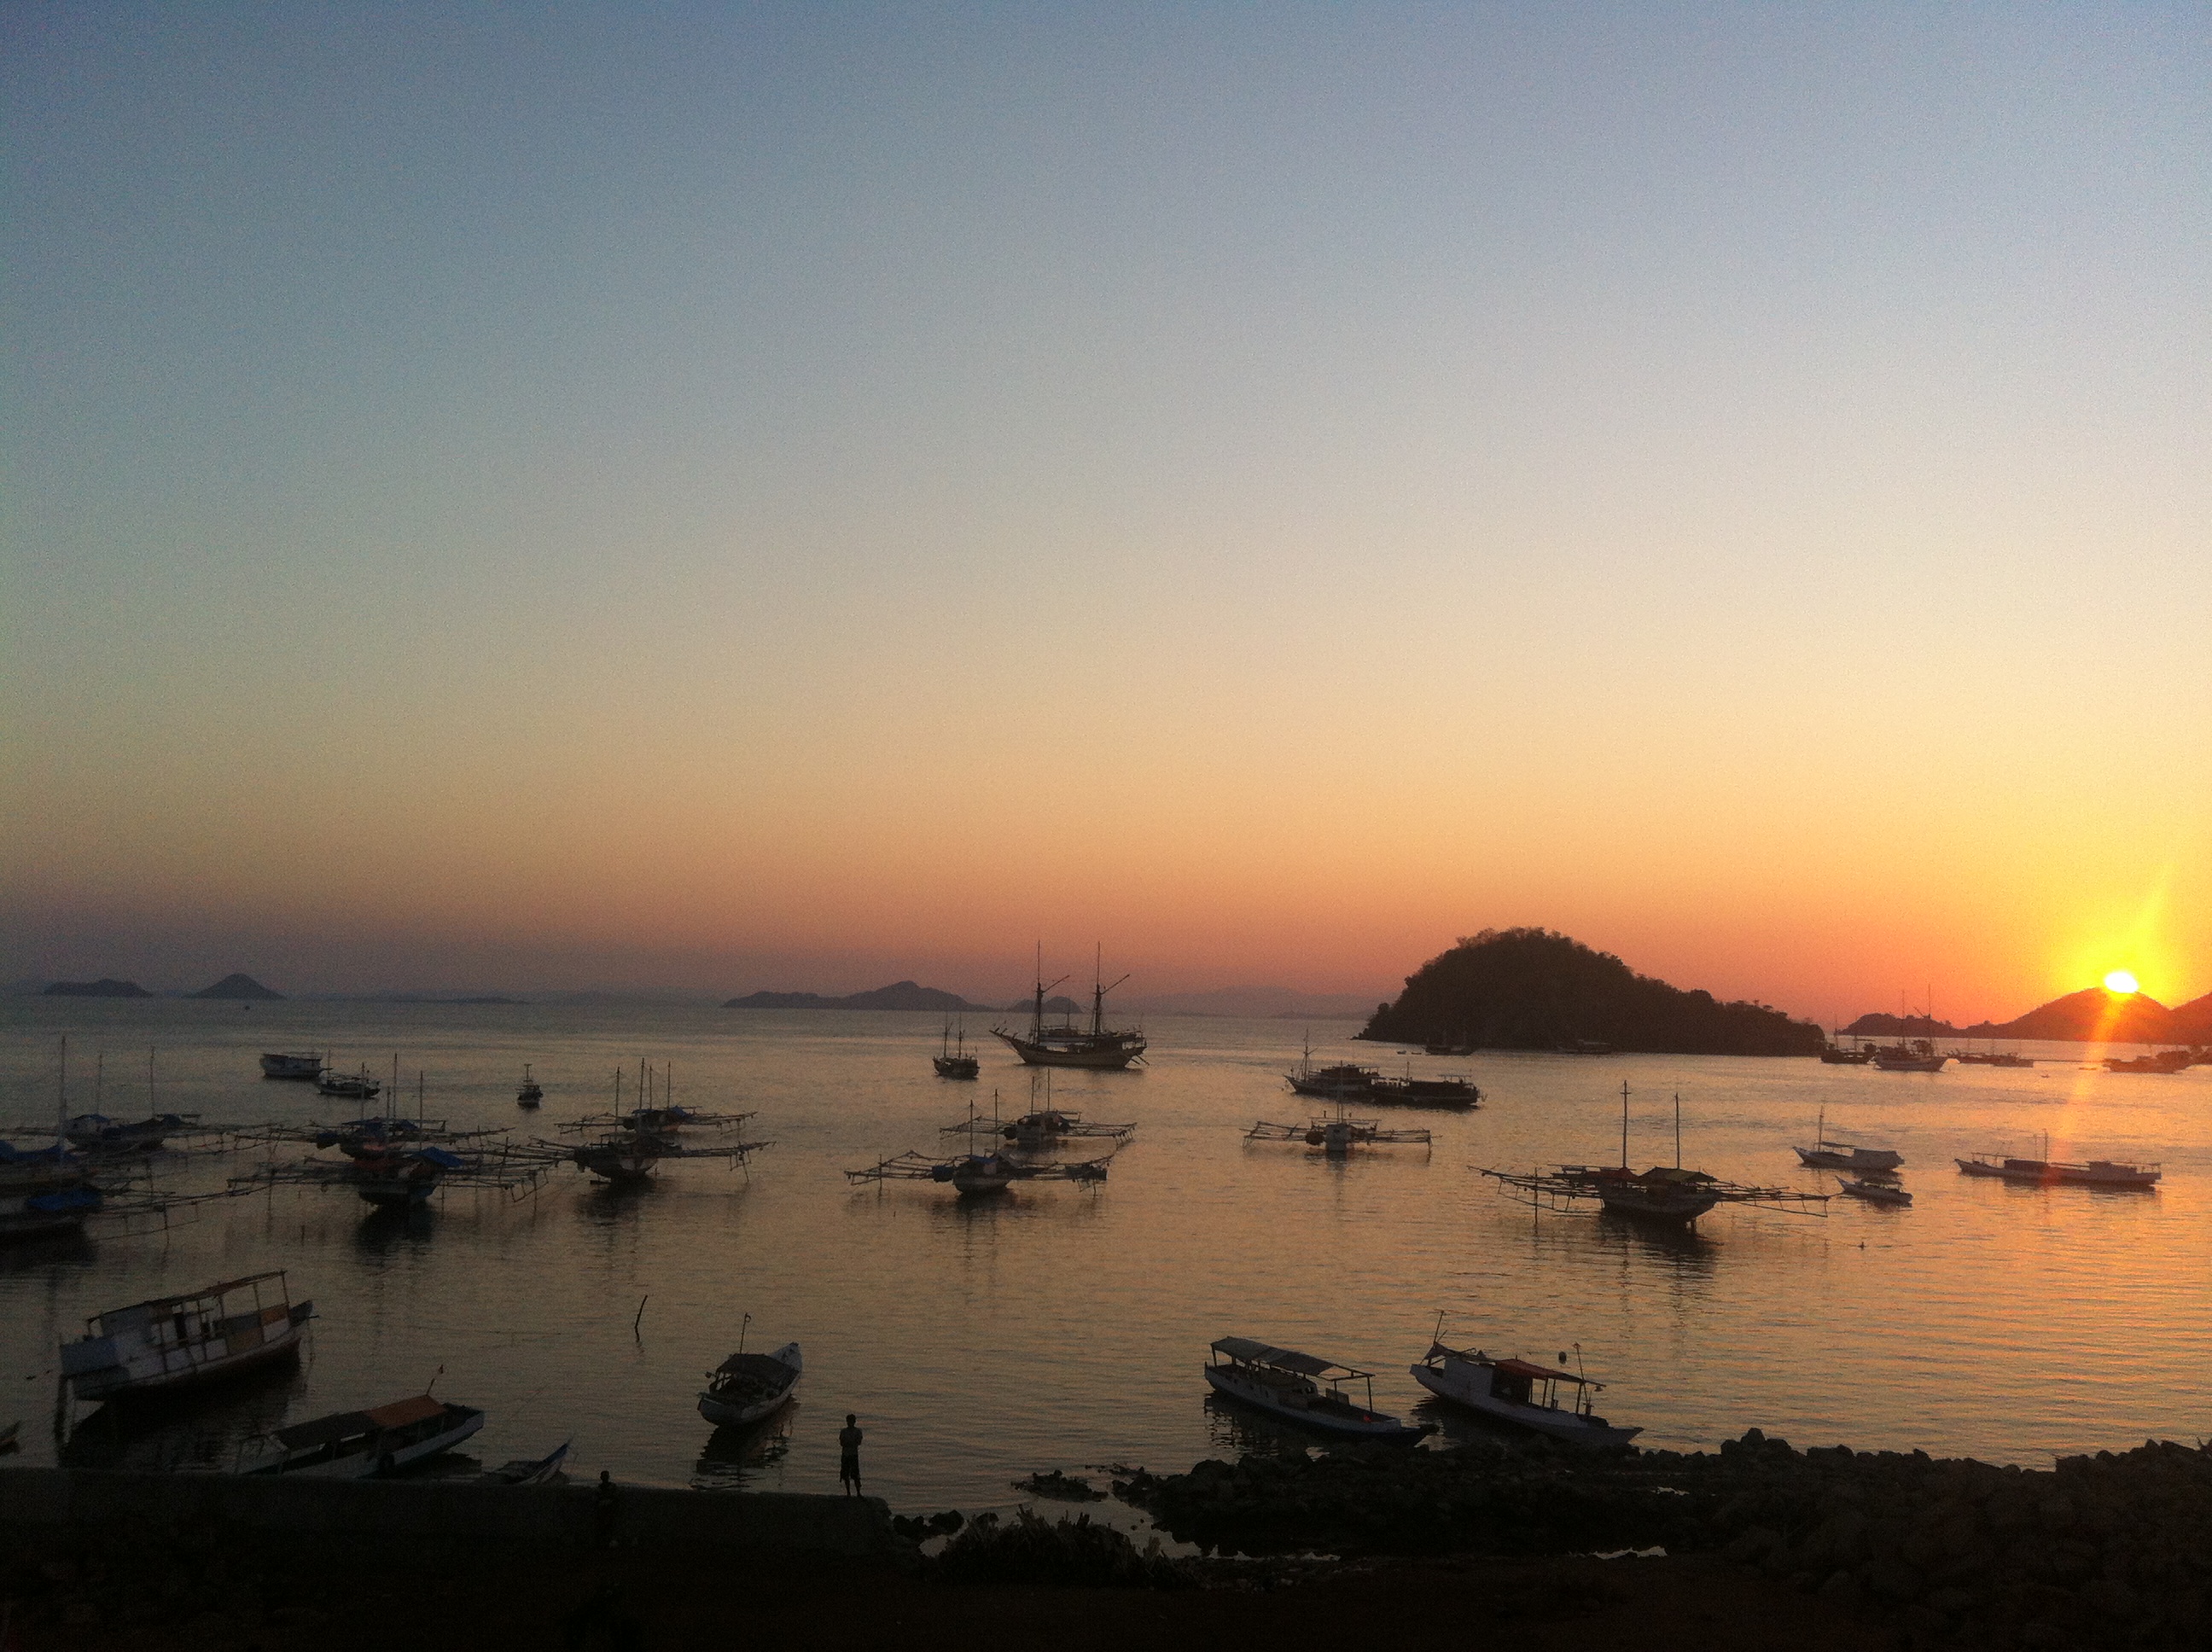 Labuan Bajo Sunsets - we never tire of these